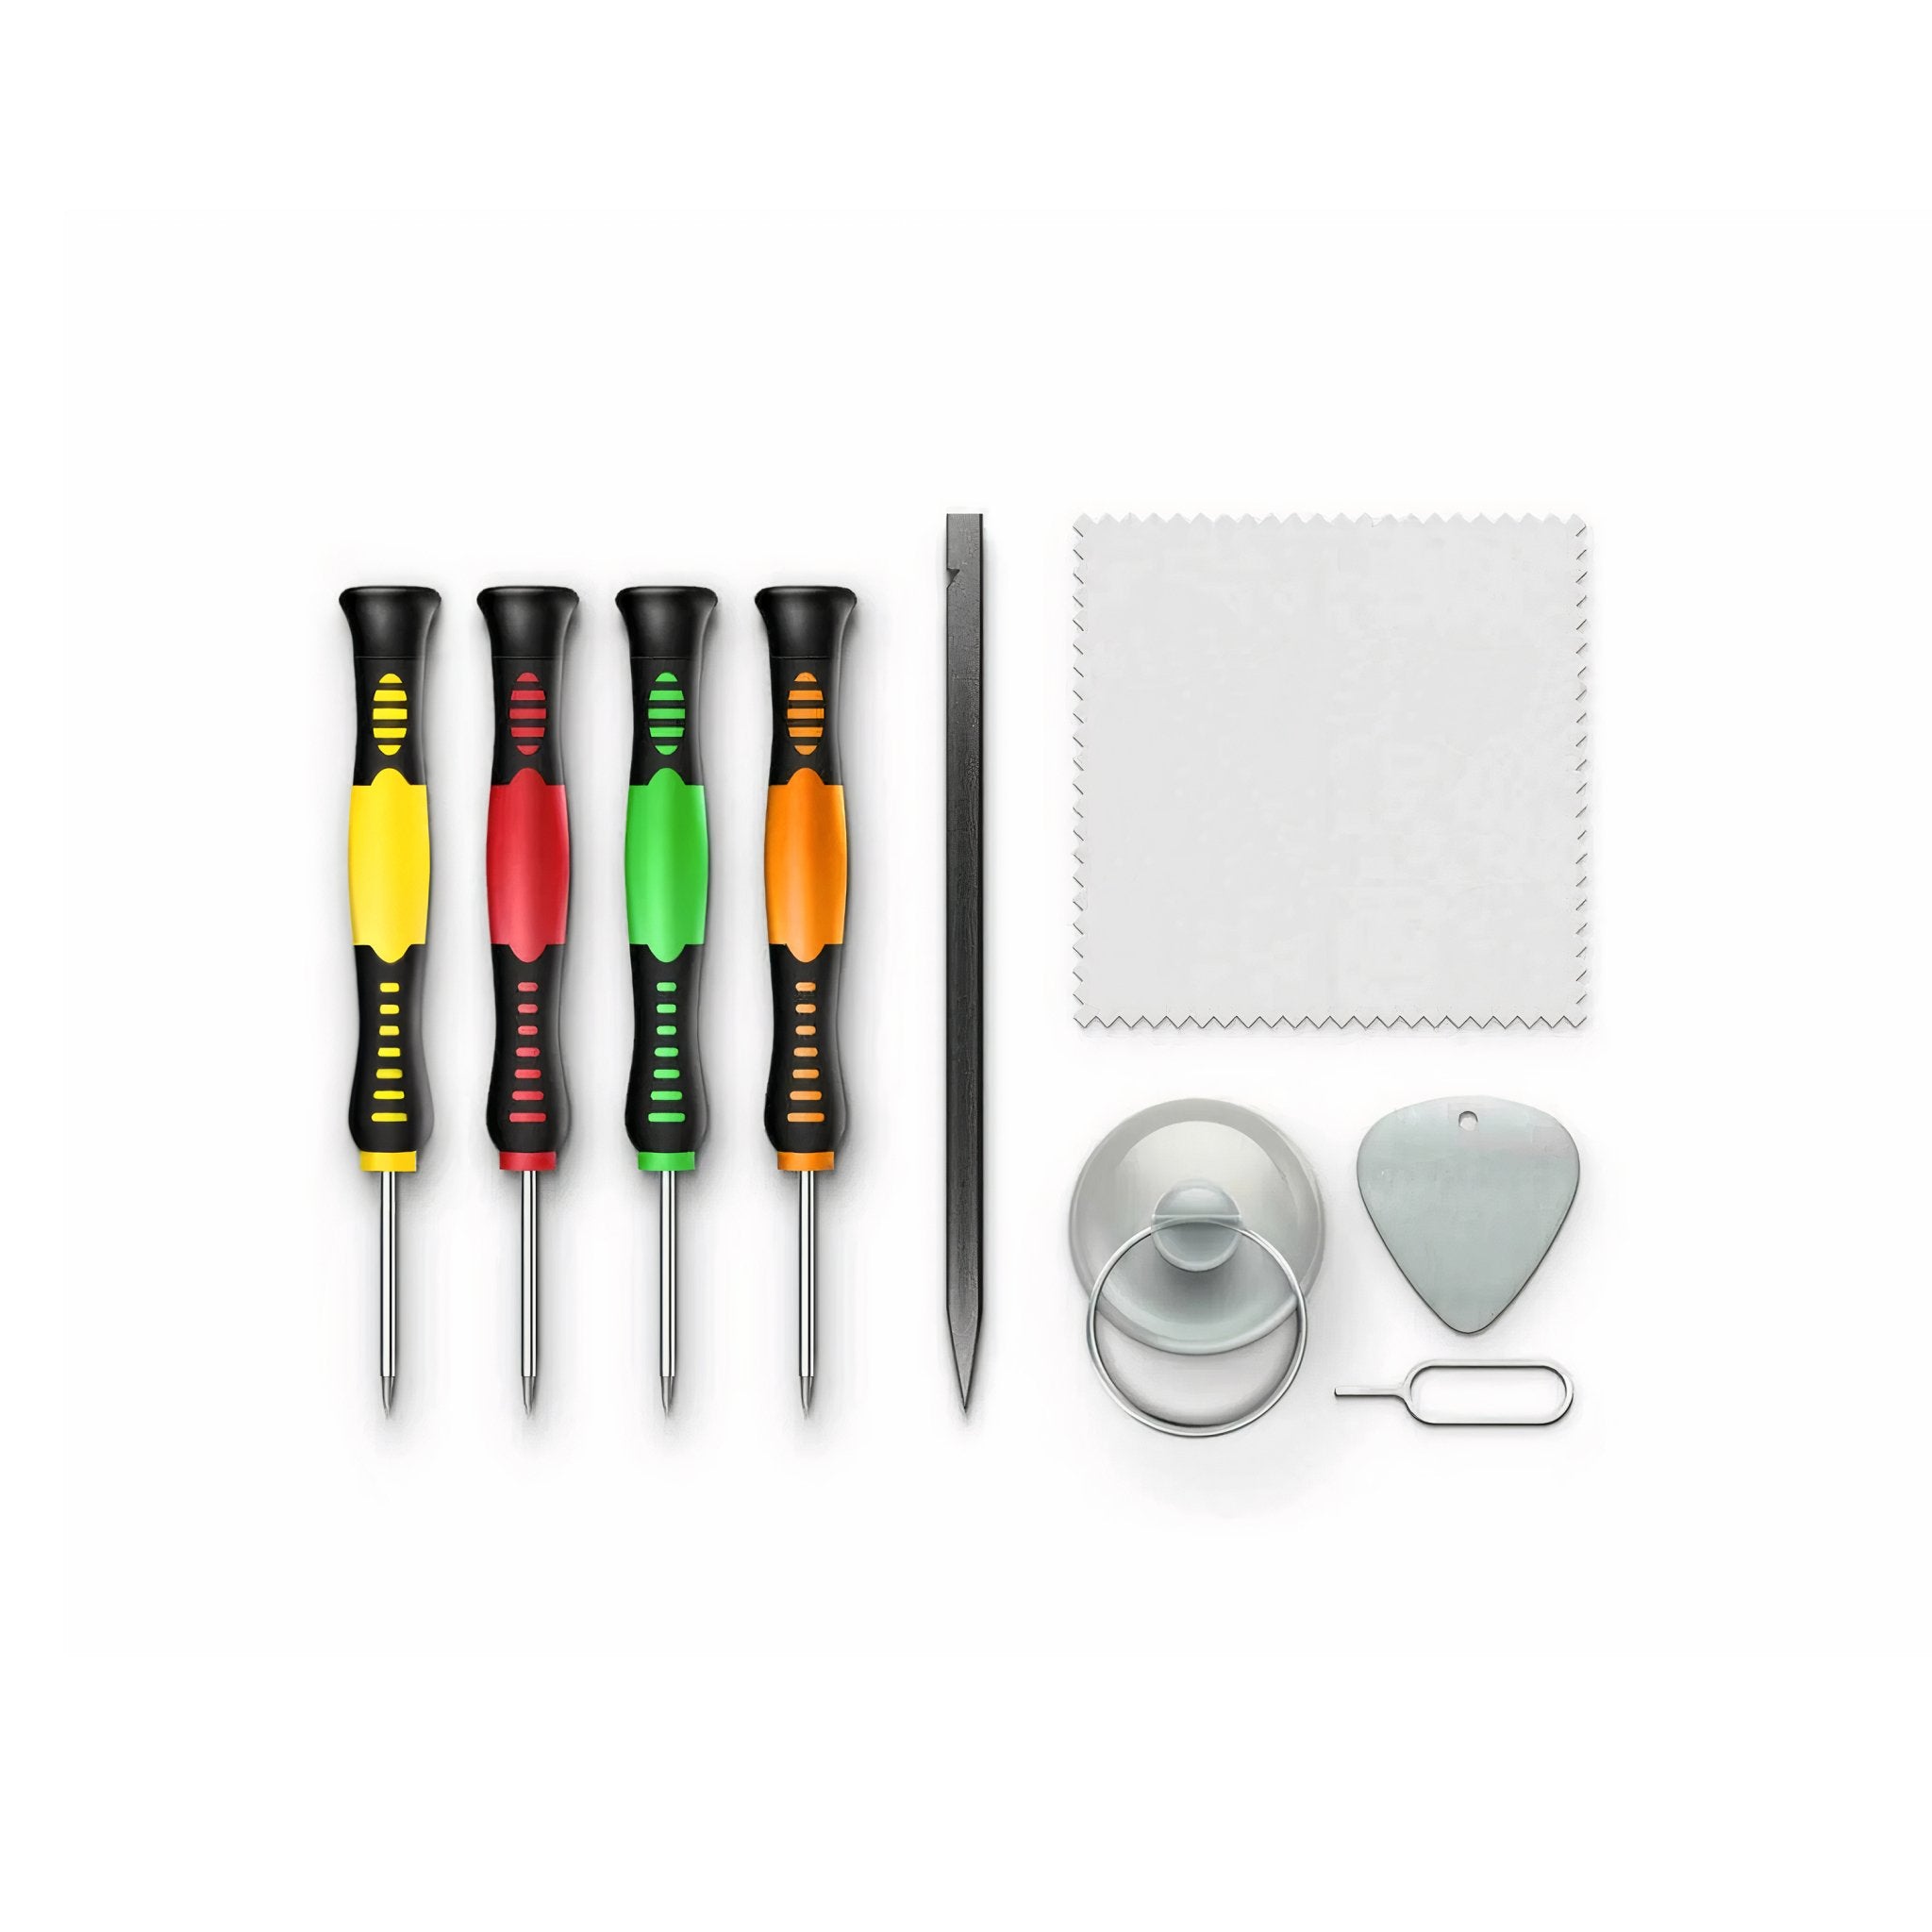 iPhone 6s Battery Replacement Kit - FixProvider